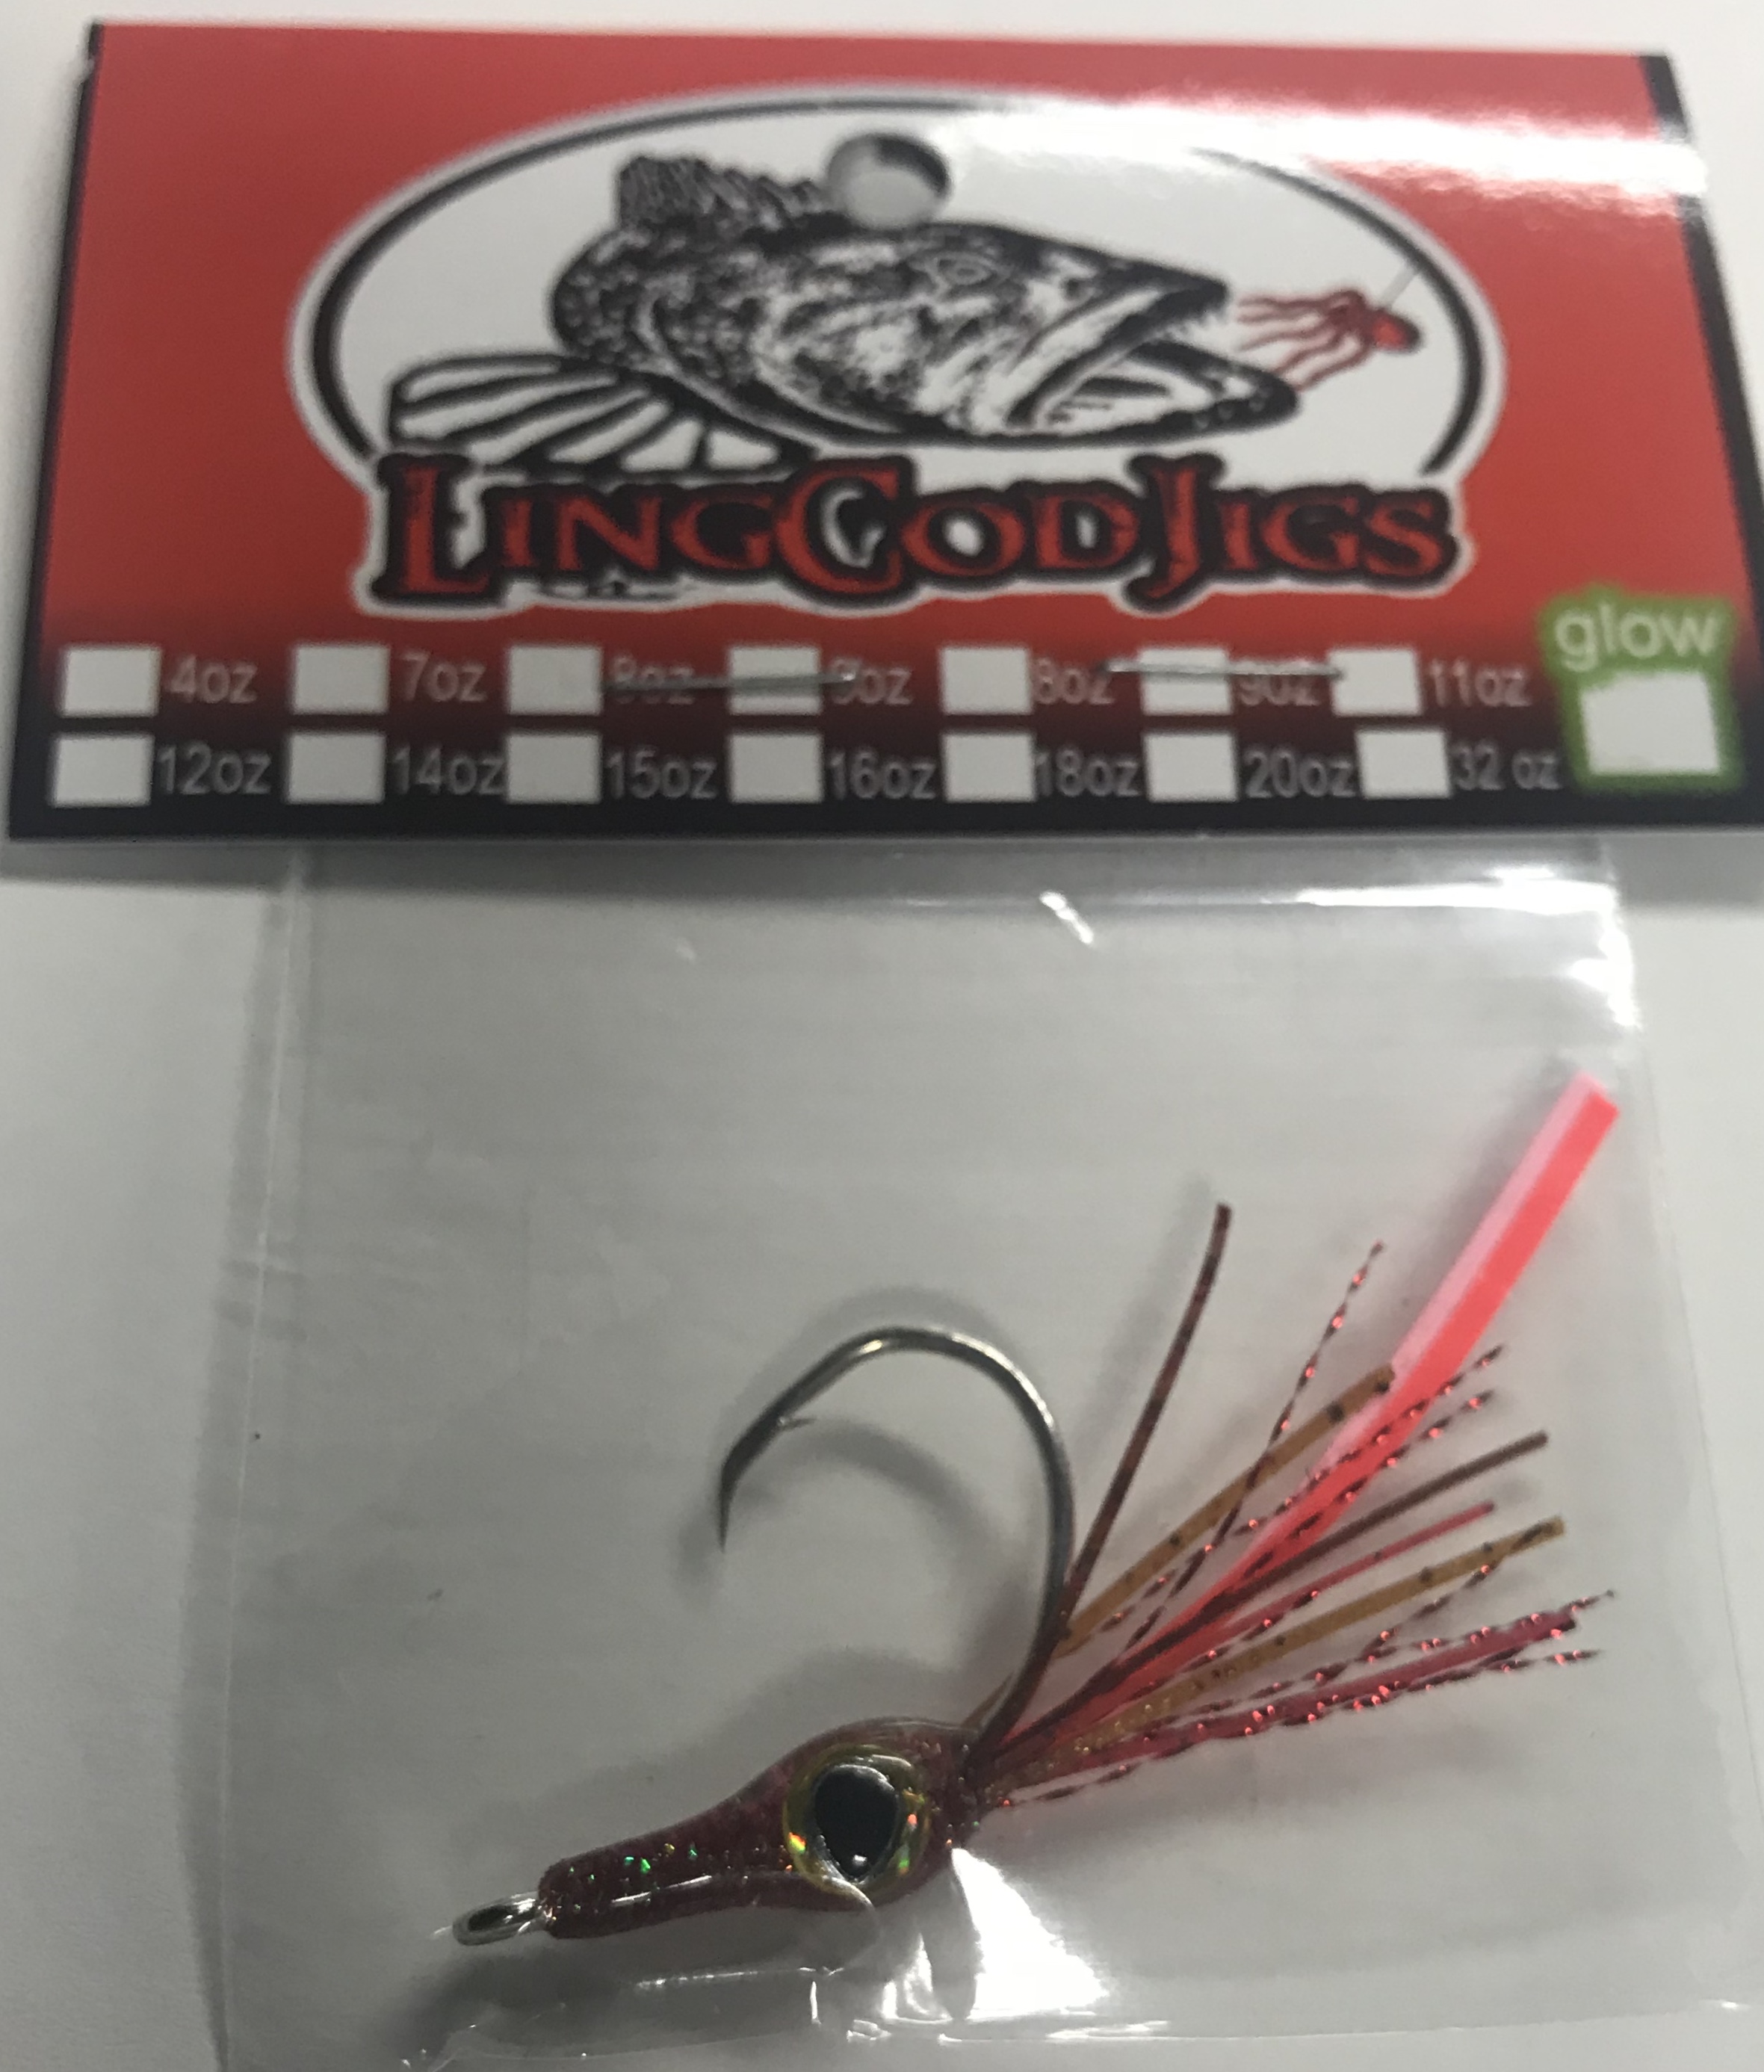 Custom hand tied and resin shrimp fly - Best Ling Cod jigs and